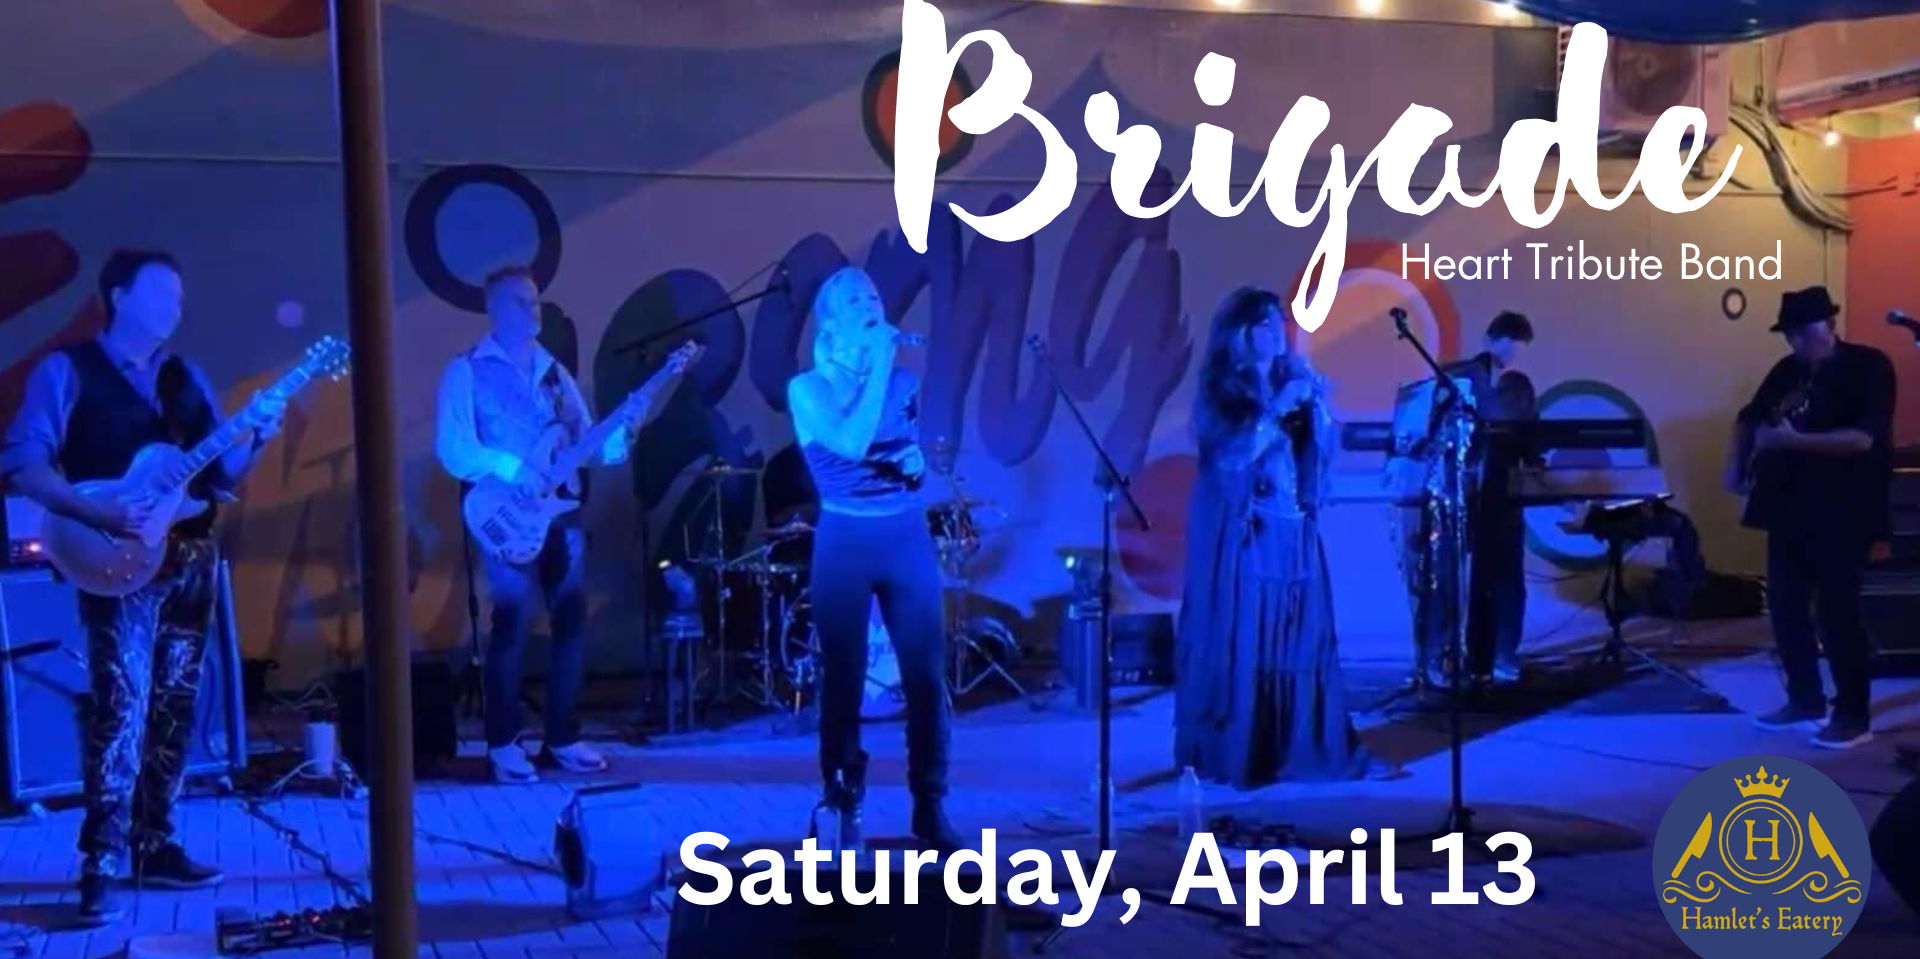 Brigade Heart Tribute Band  promotional image